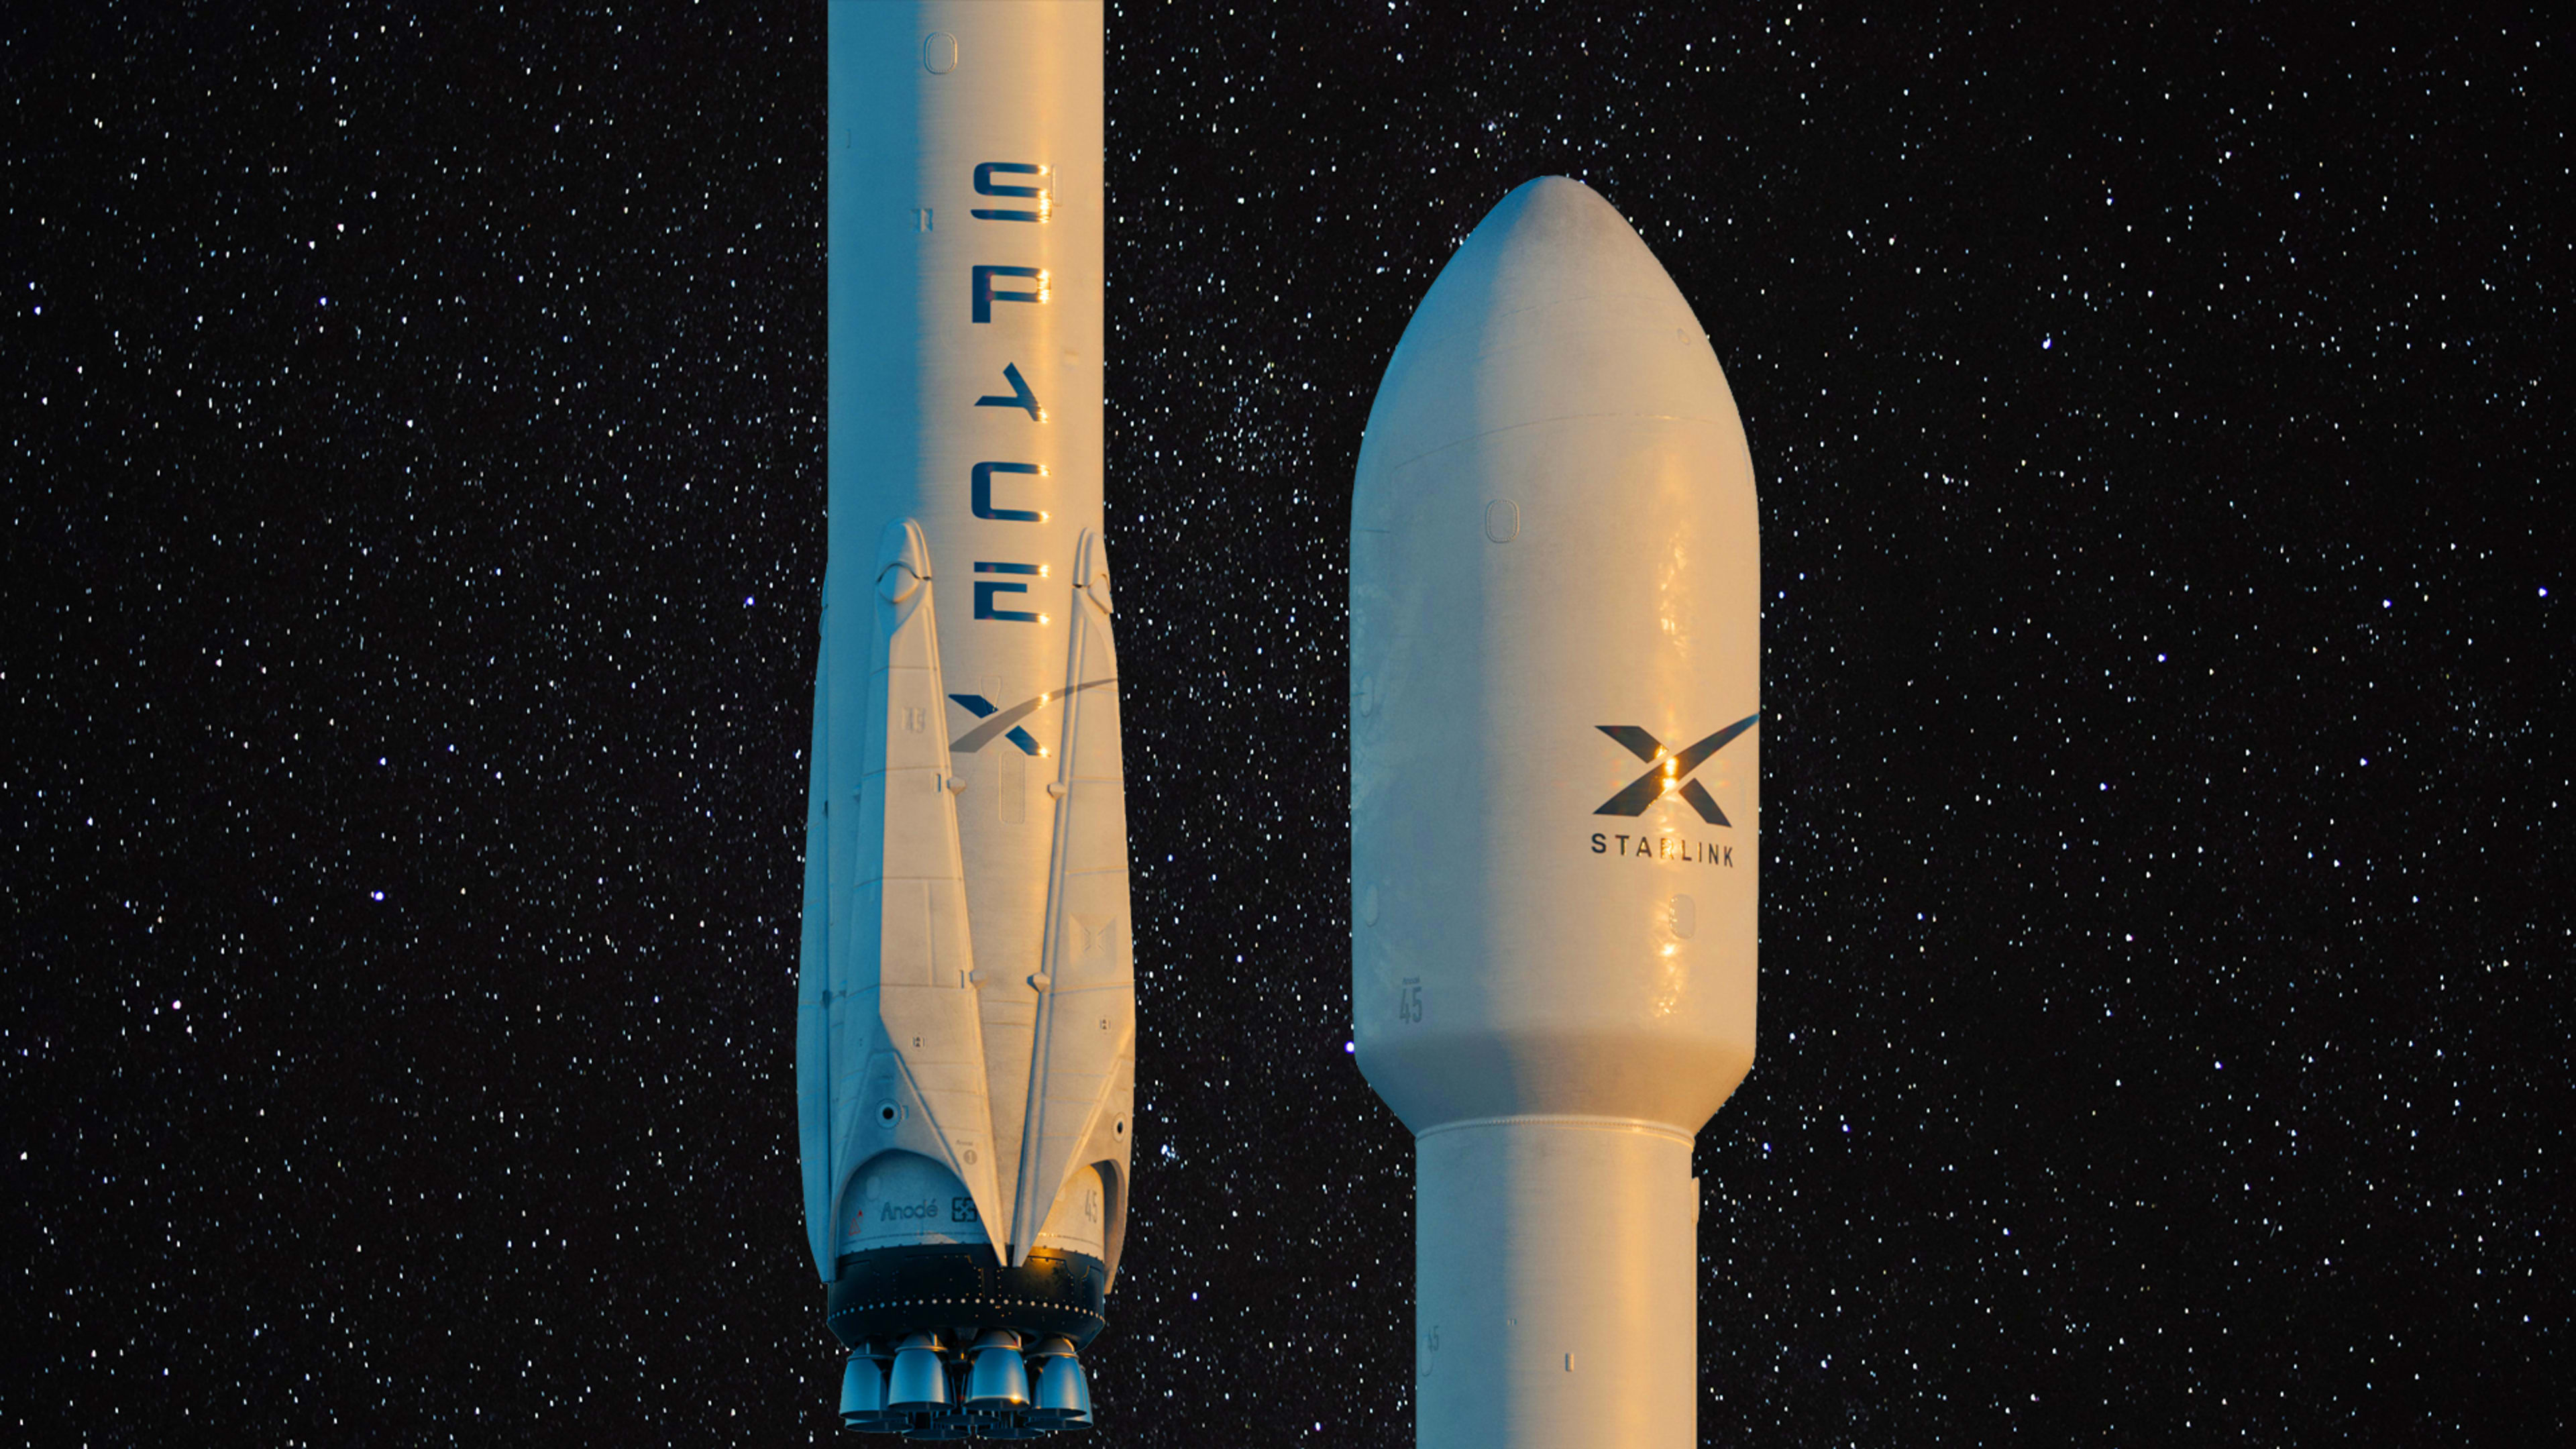 The FCC shot down SpaceX’s bid for $866 million bid in subsidies to roll out Starlink in rural America